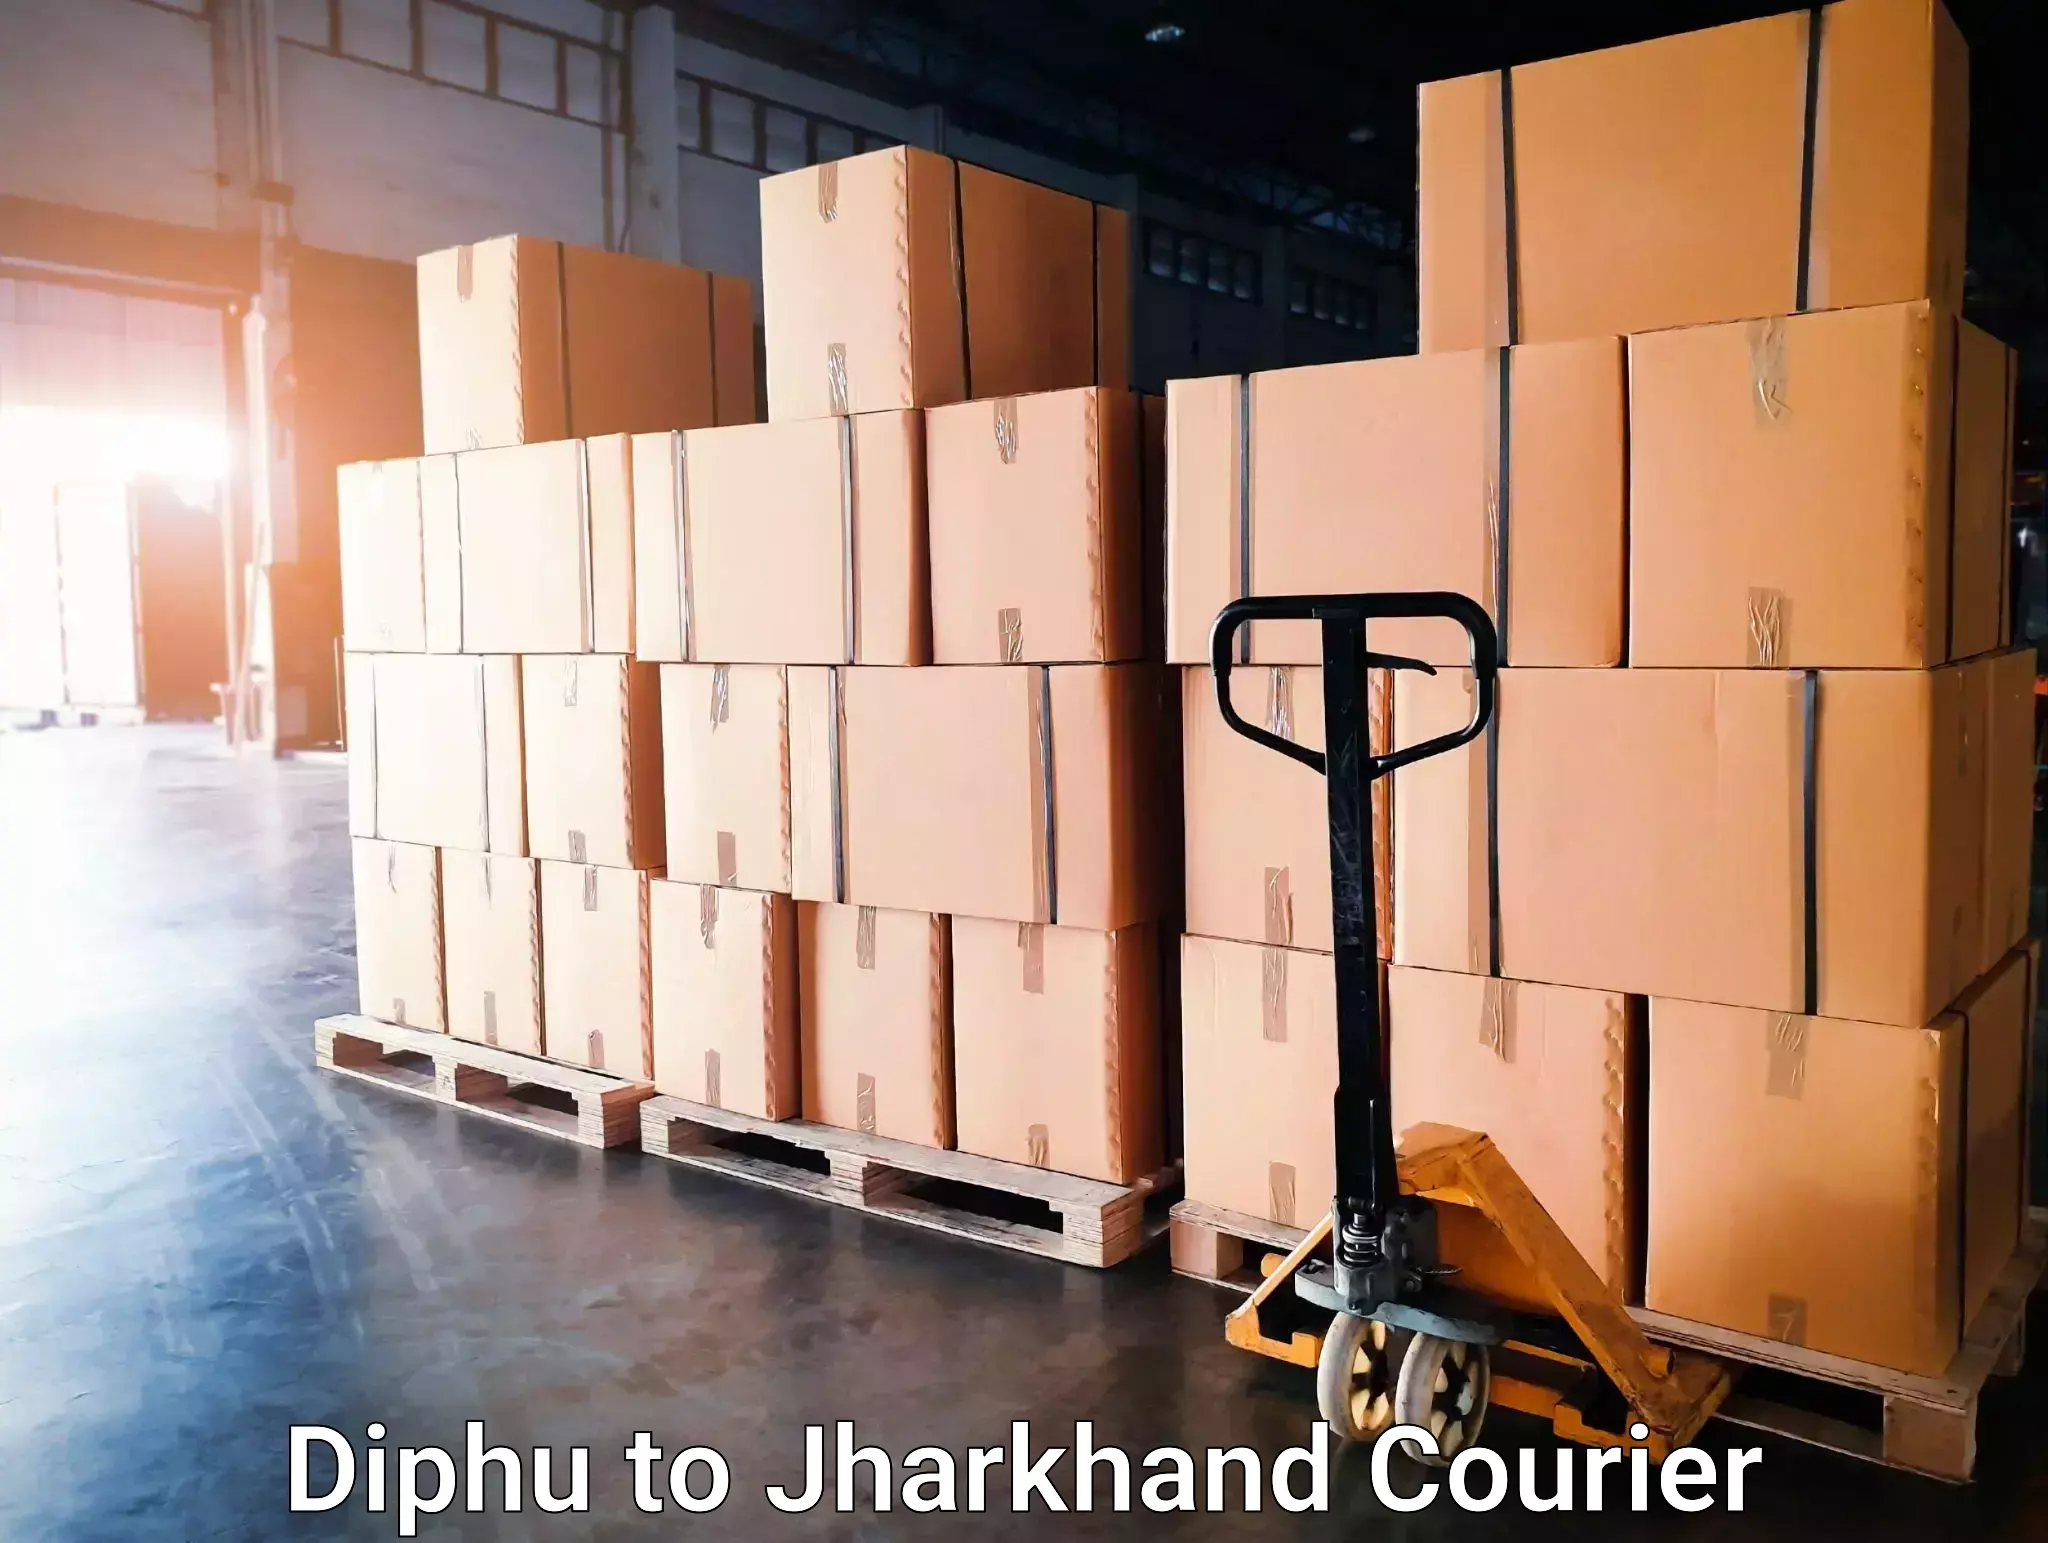 Large package courier Diphu to Bokaro Steel City